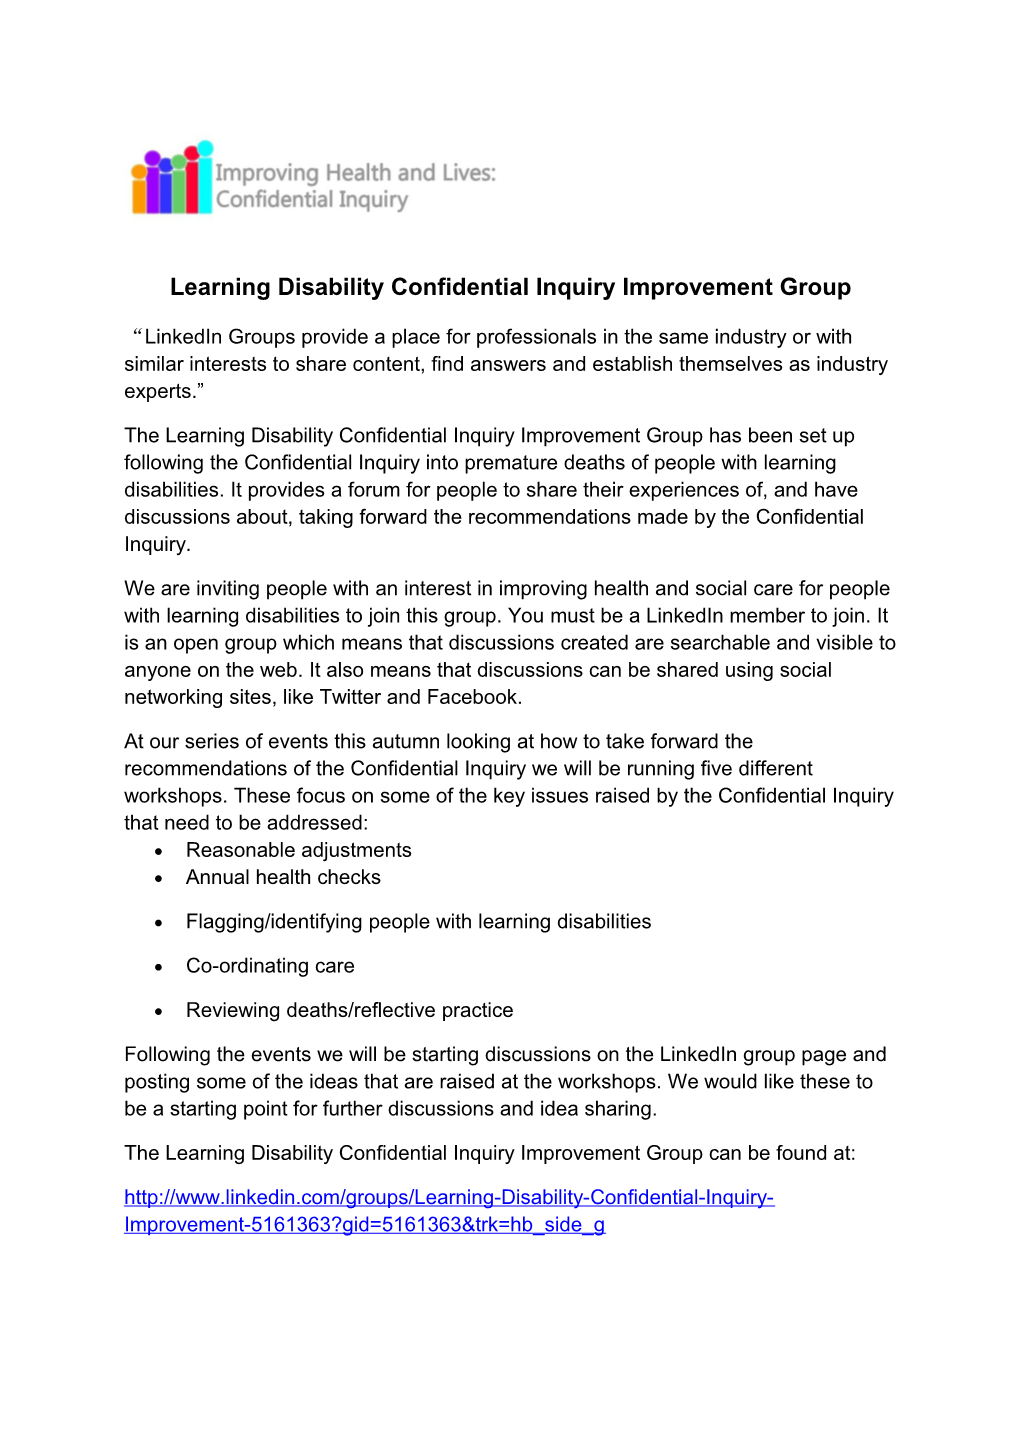 Learning Disability Confidential Inquiry Improvement Group